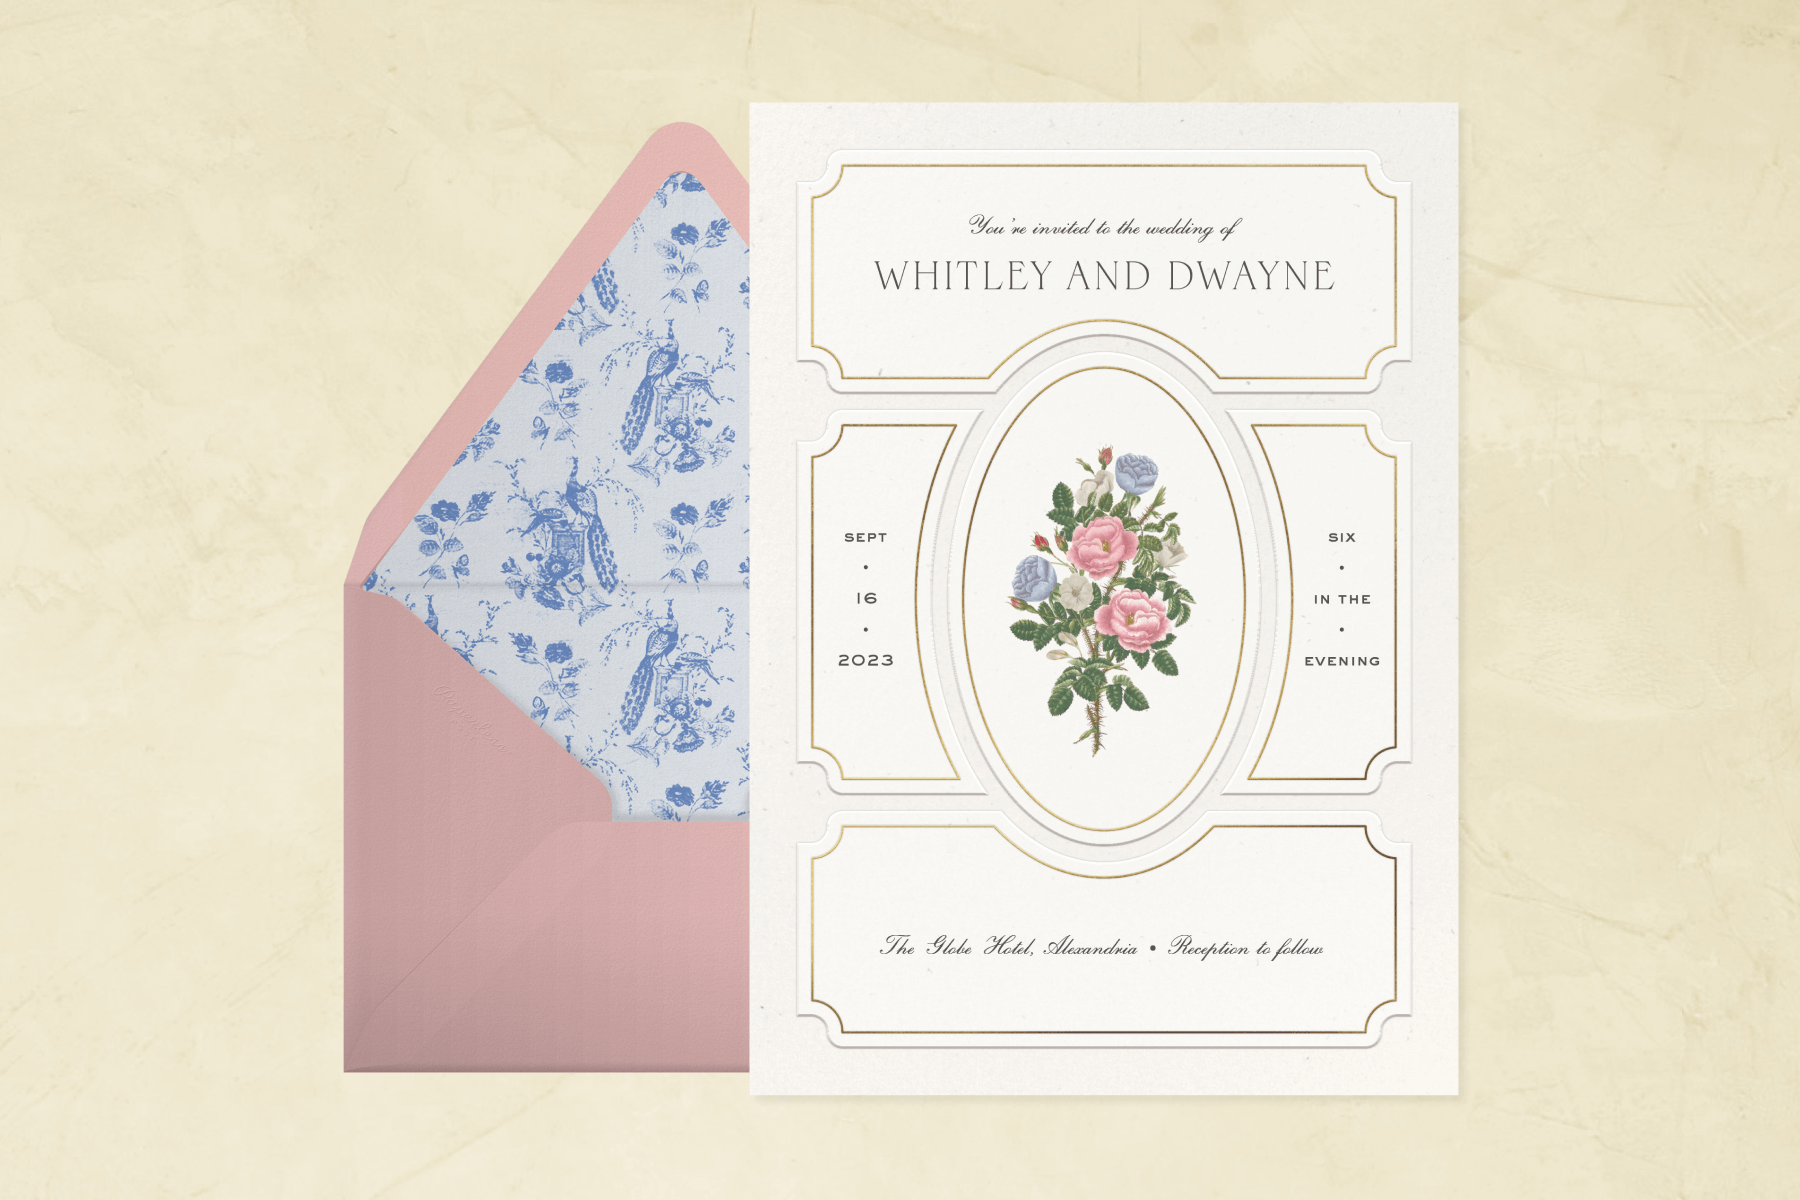 A white wedding invitation with picture frame molding-inspired shapes and an oval in the middle framing a bouquet of colorful roses and a pink envelope with a blue toile lining.